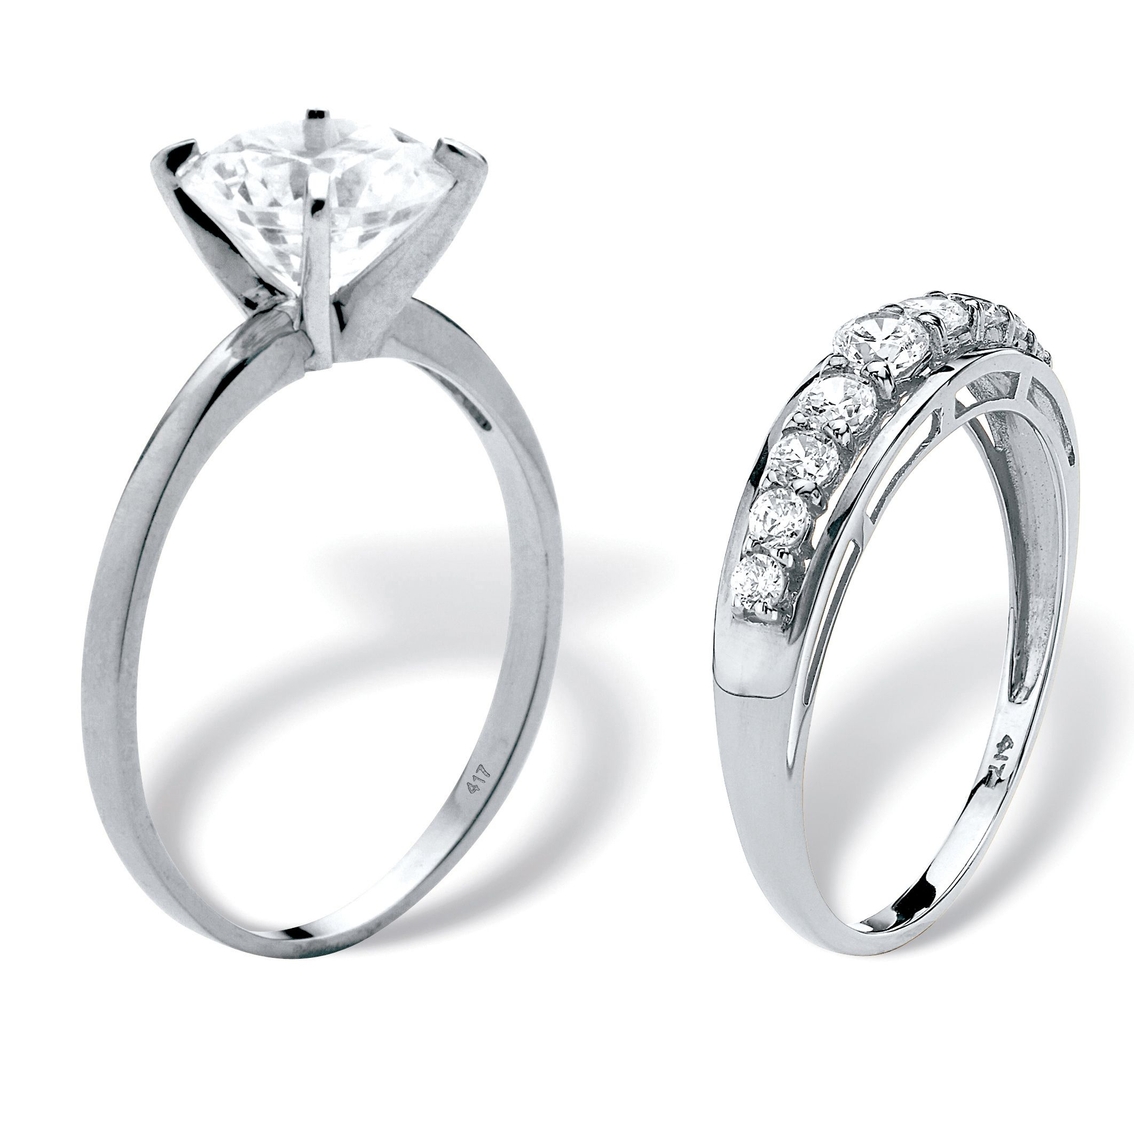 PalmBeach 2.93 Cttw. Solid 10k White Gold Round Cubic Zirconia  Wedding Ring Set - Image 2 of 5